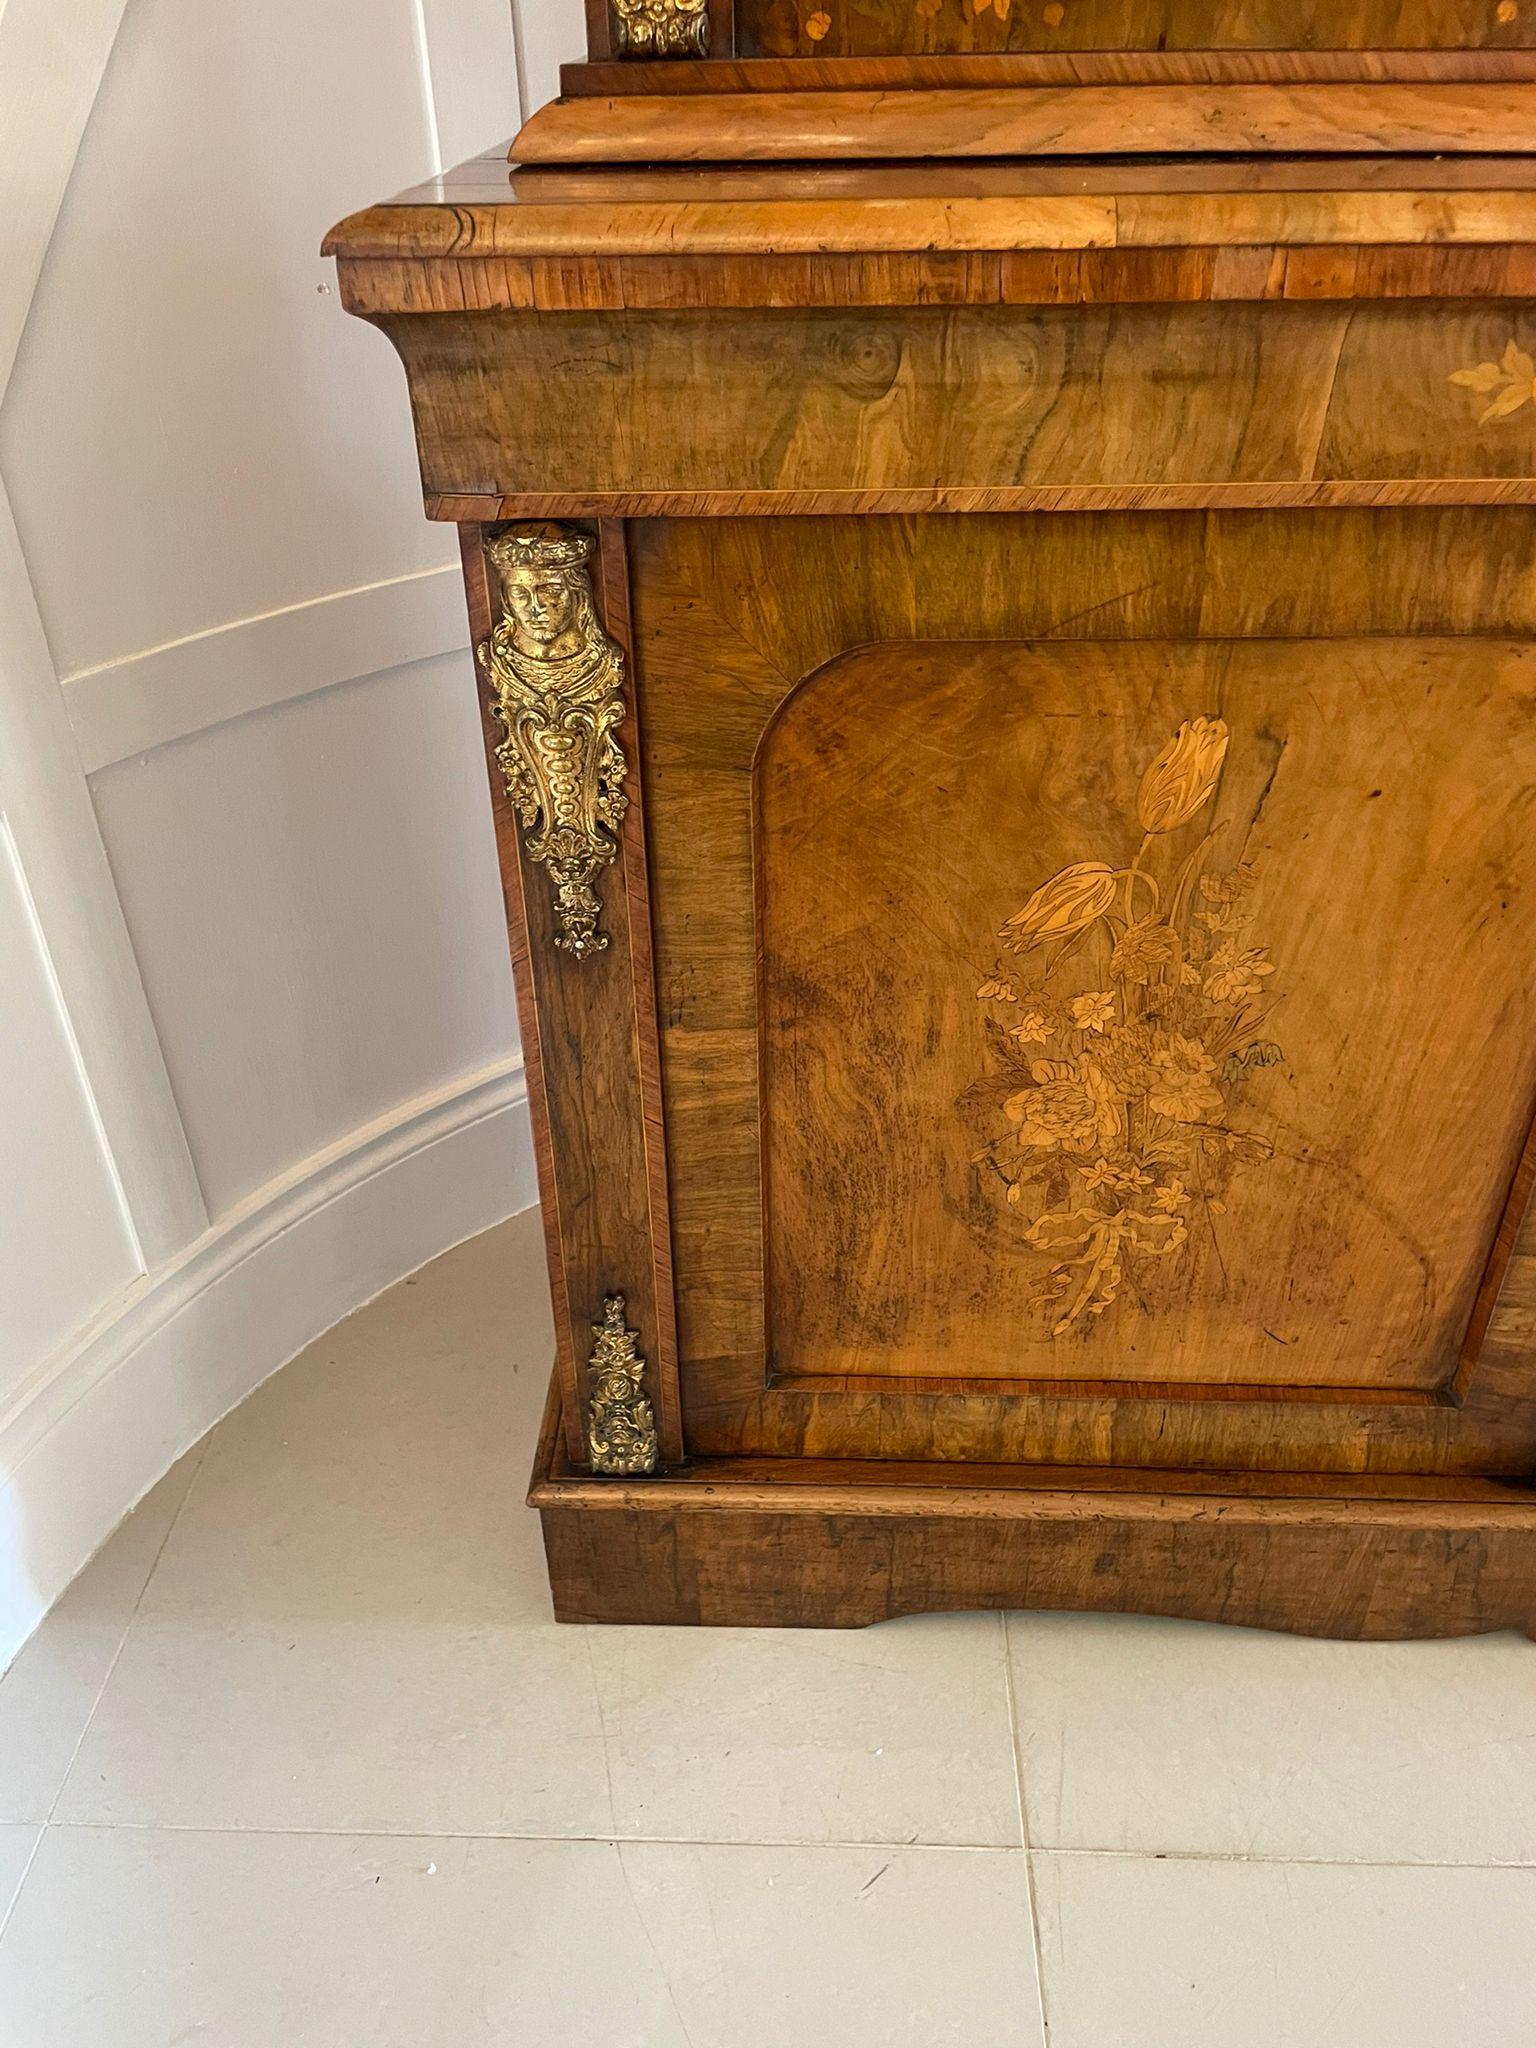 Outstanding quality antique Victorian burr walnut marquetry inlaid ormolu mounted bookcase cabinet having a quality moulded cornice above a pair of pretty burr walnut floral marquetry inlaid glazed doors opening to reveal three adjustable shelves